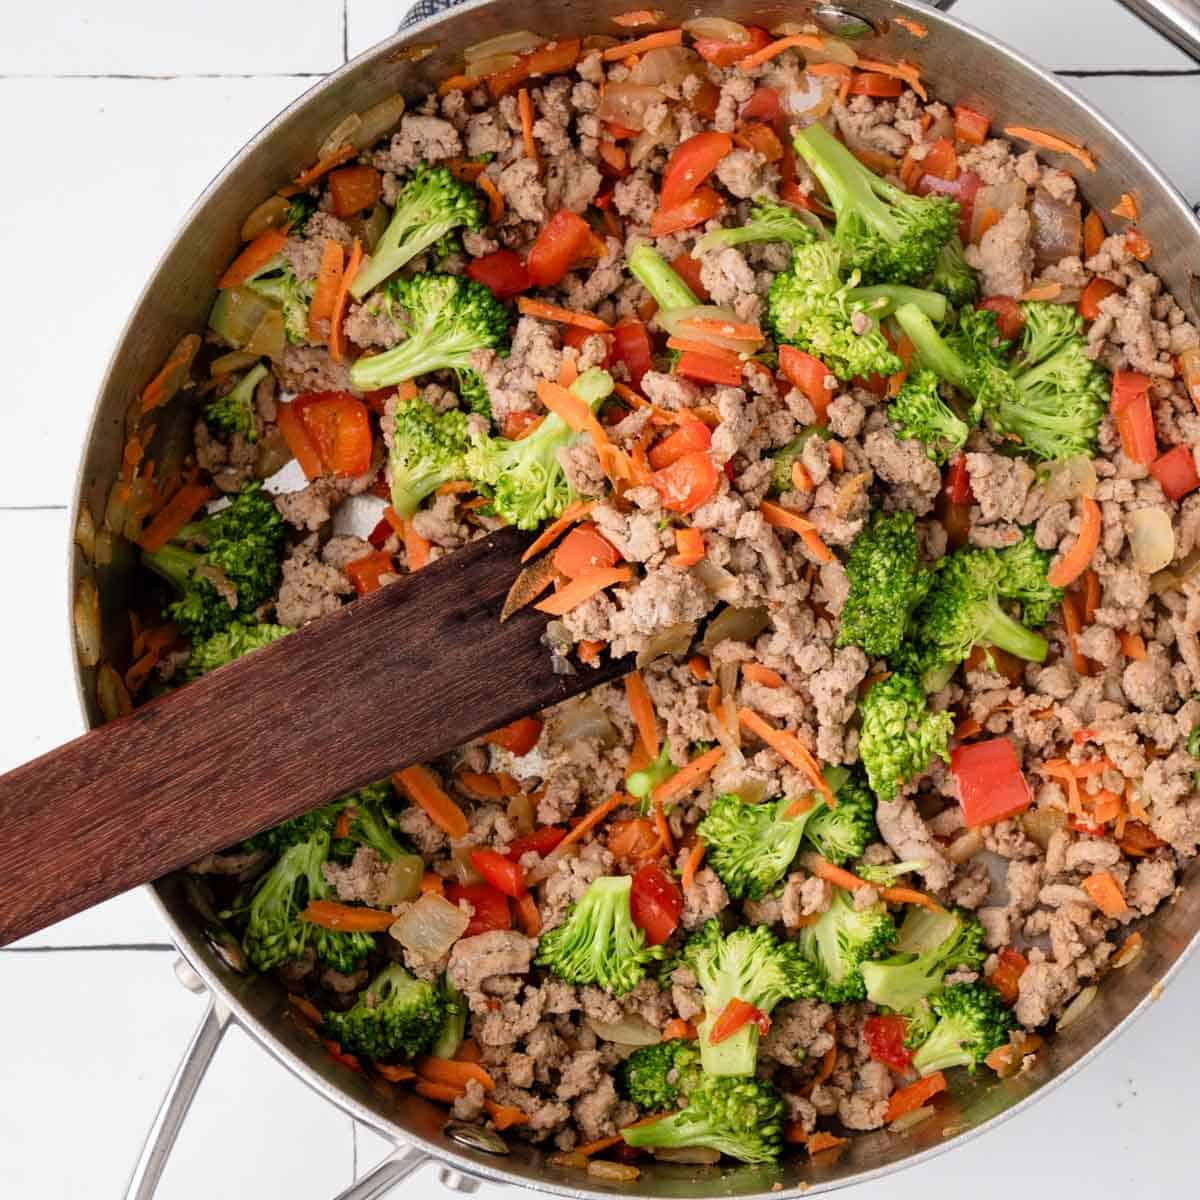 ground turkey, broccoli and other veggies cooked in a skillet